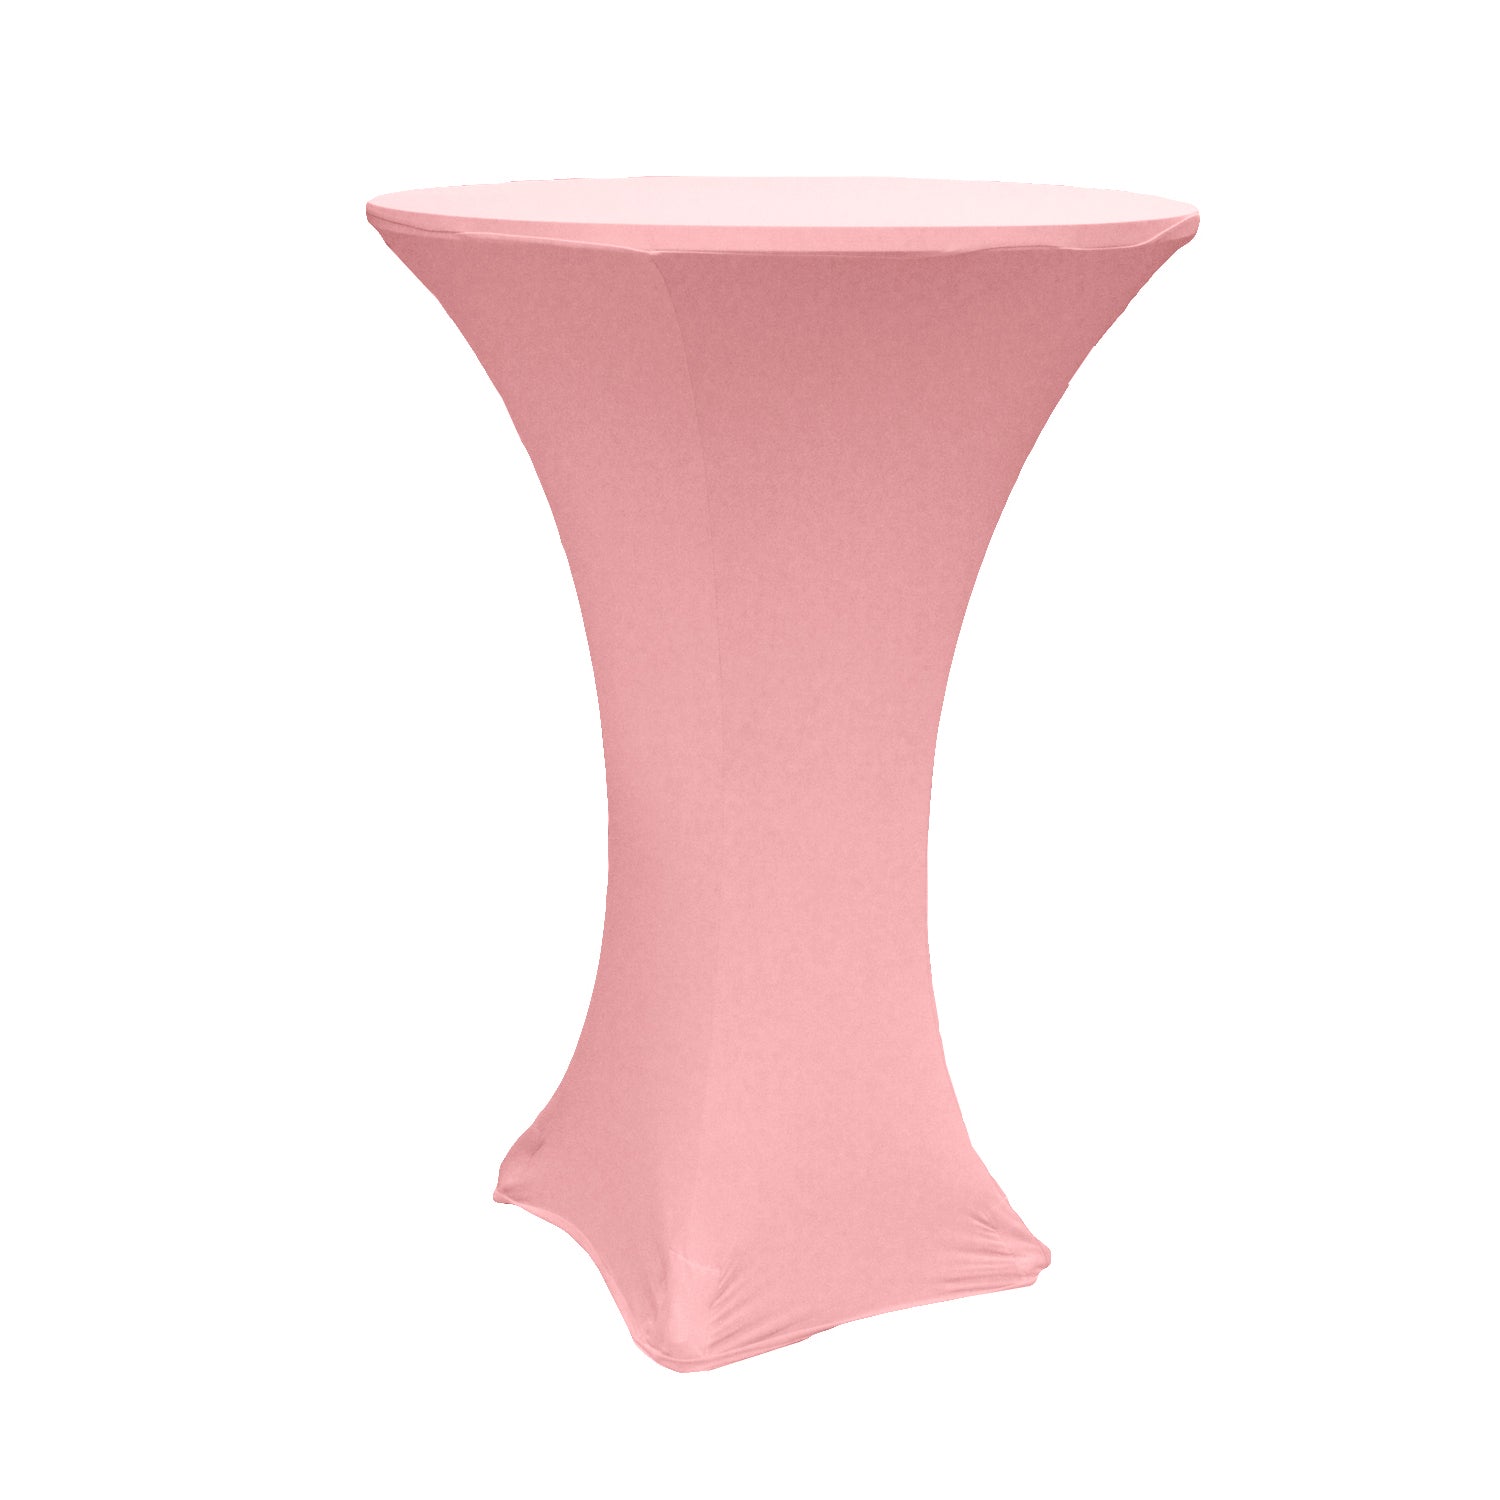 Spandex Cocktail Table Cover 30" Round - Dusty Rose/Mauve - CV Linens